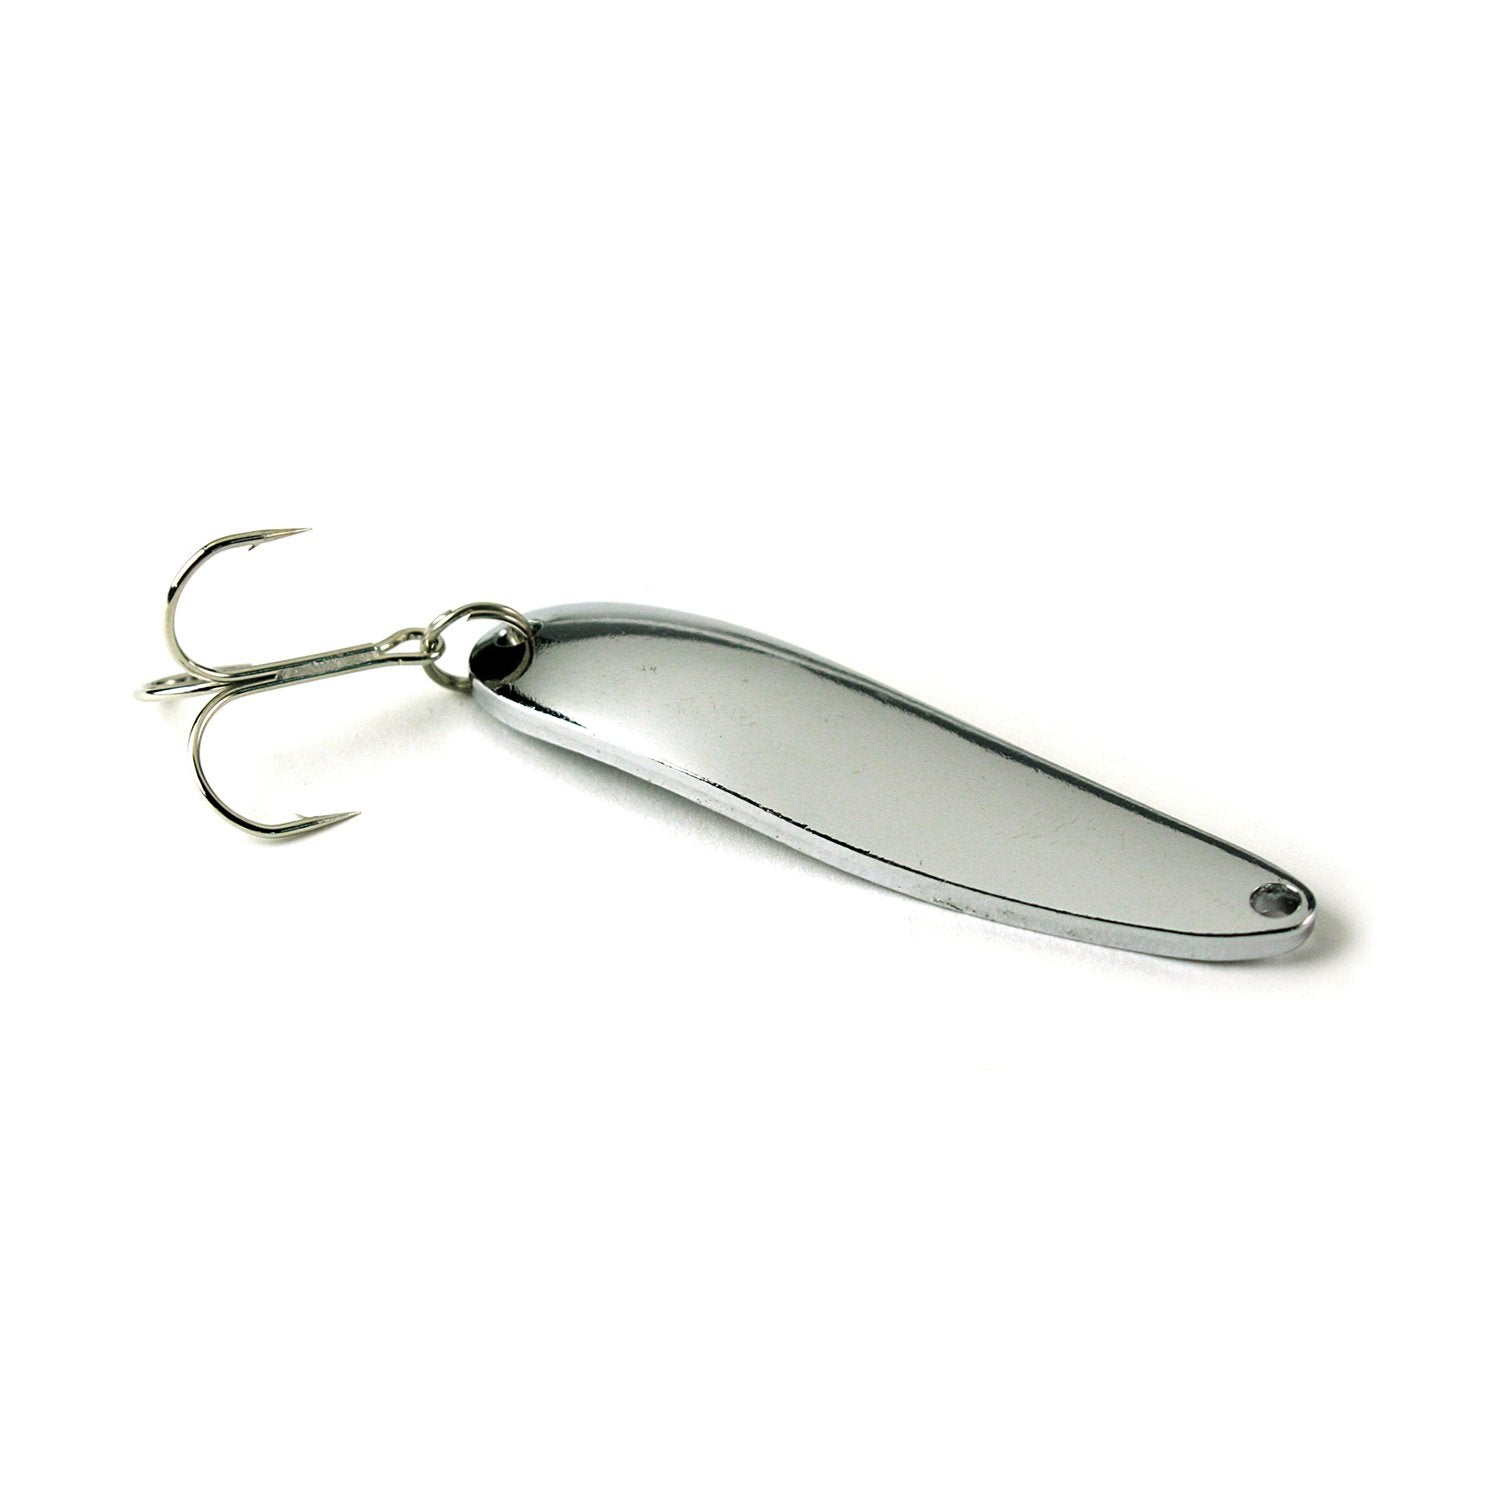 10g 15g 20g 25g Silver Gold Fishing Lure Spoon Mustad Hooks High